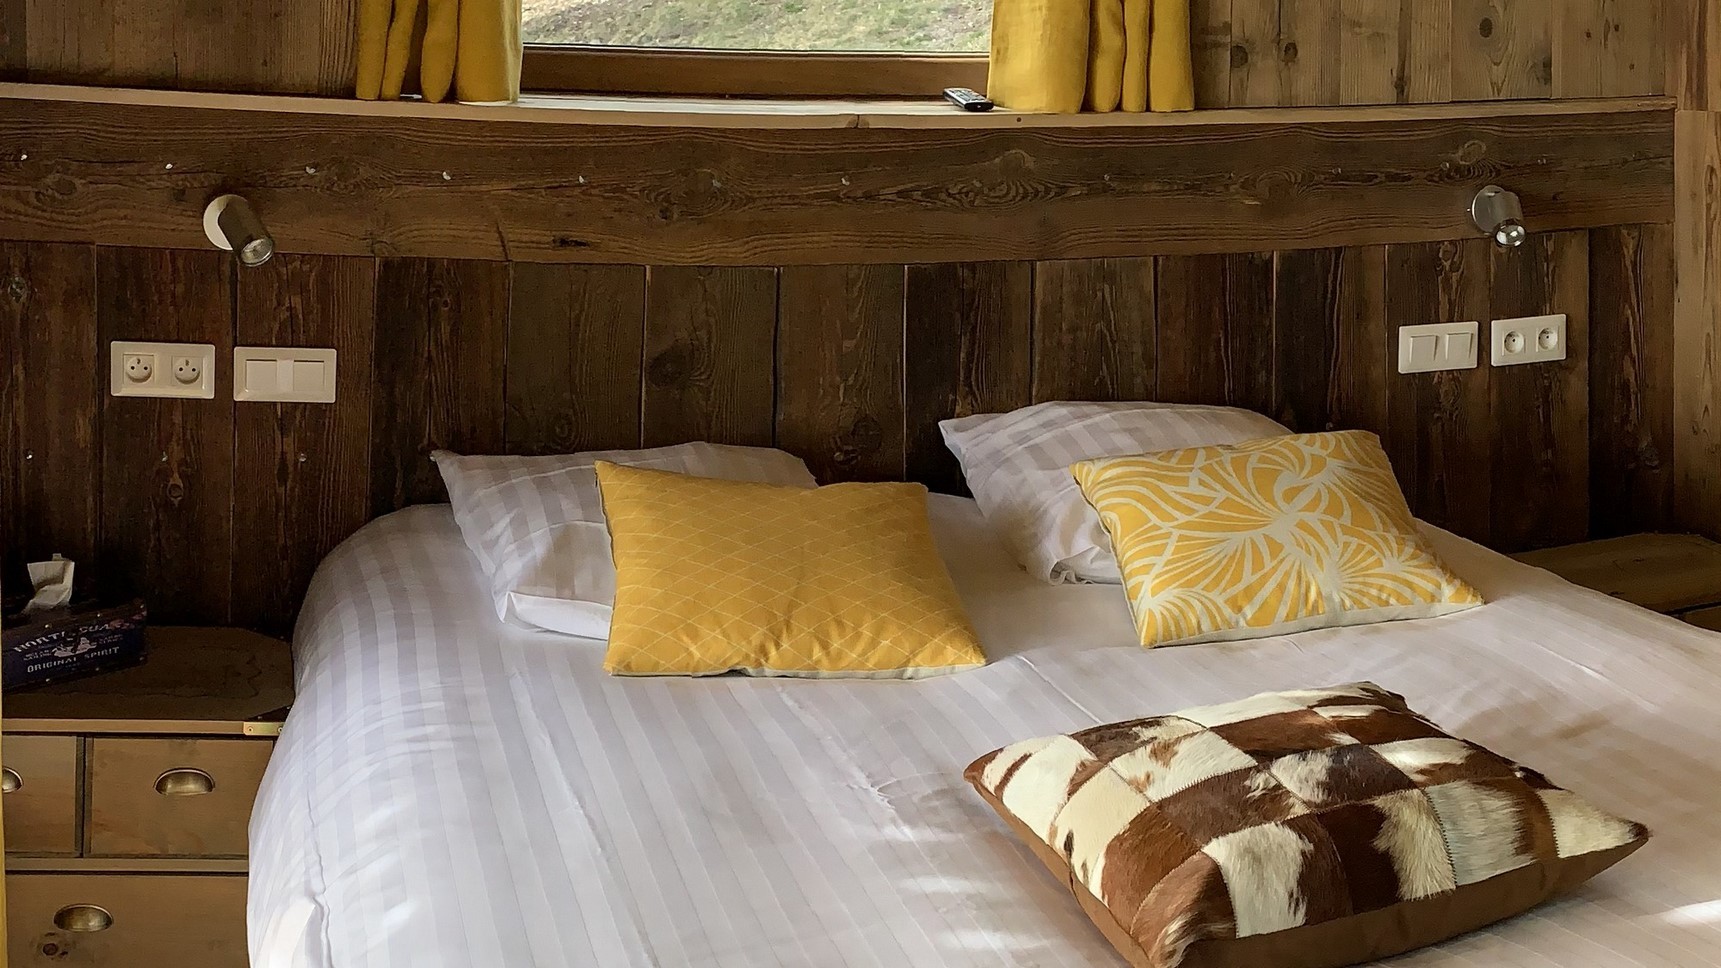 Super Besse chalet, Anorak chalet, waterfall bedroom and its headboard